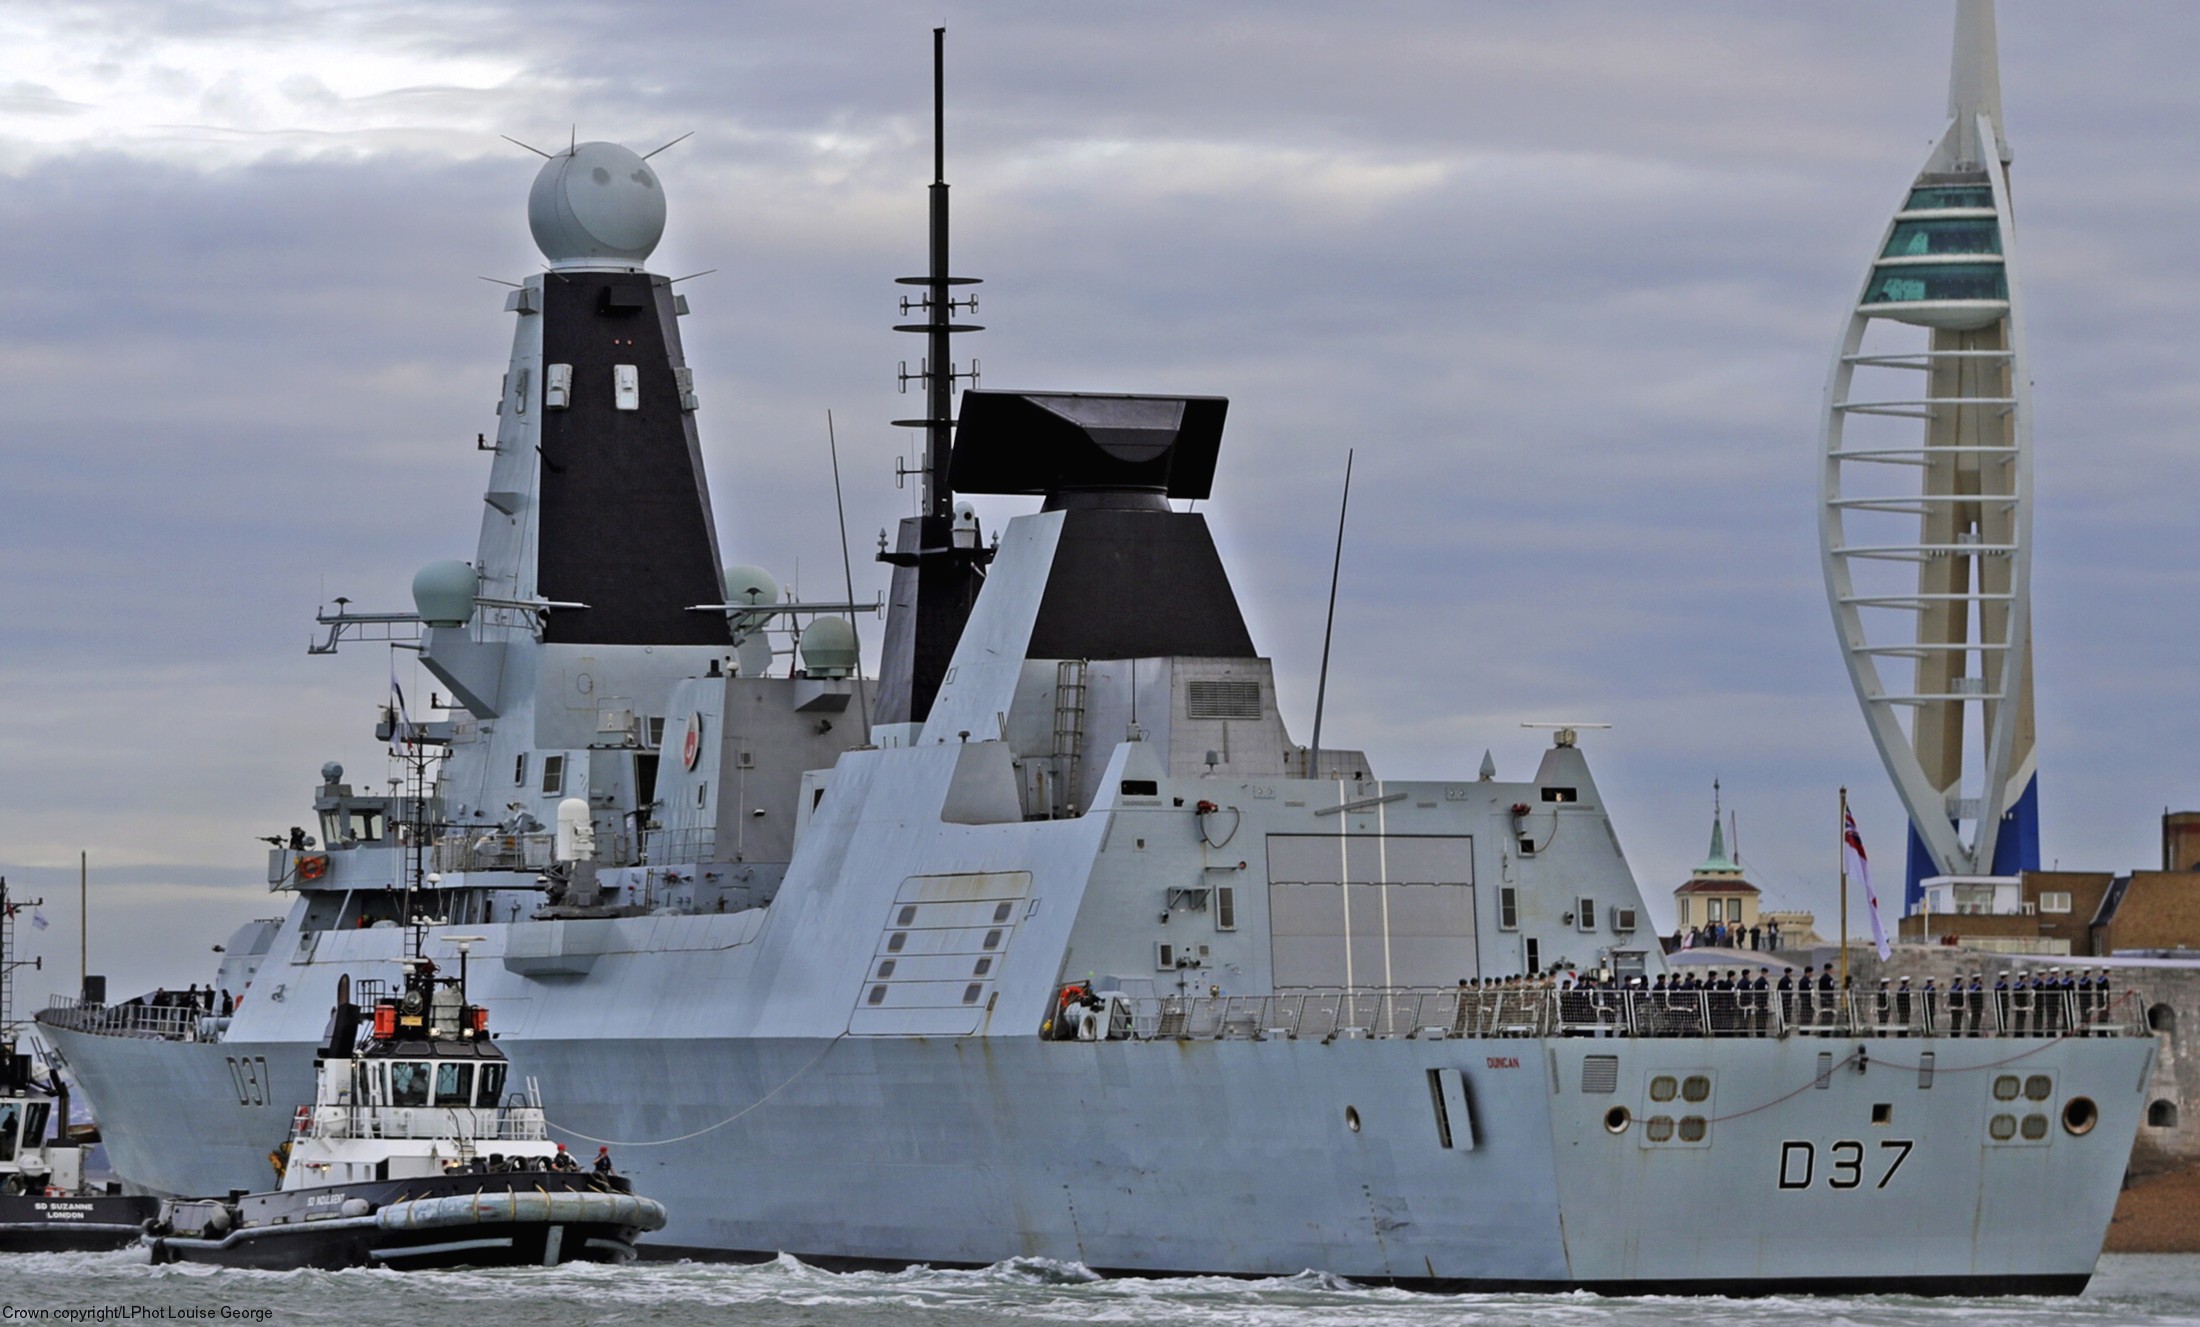 d37 hms duncan d-37 type 45 daring class guided missile destroyer ddg royal navy sea viper hmnb portsmouth 23